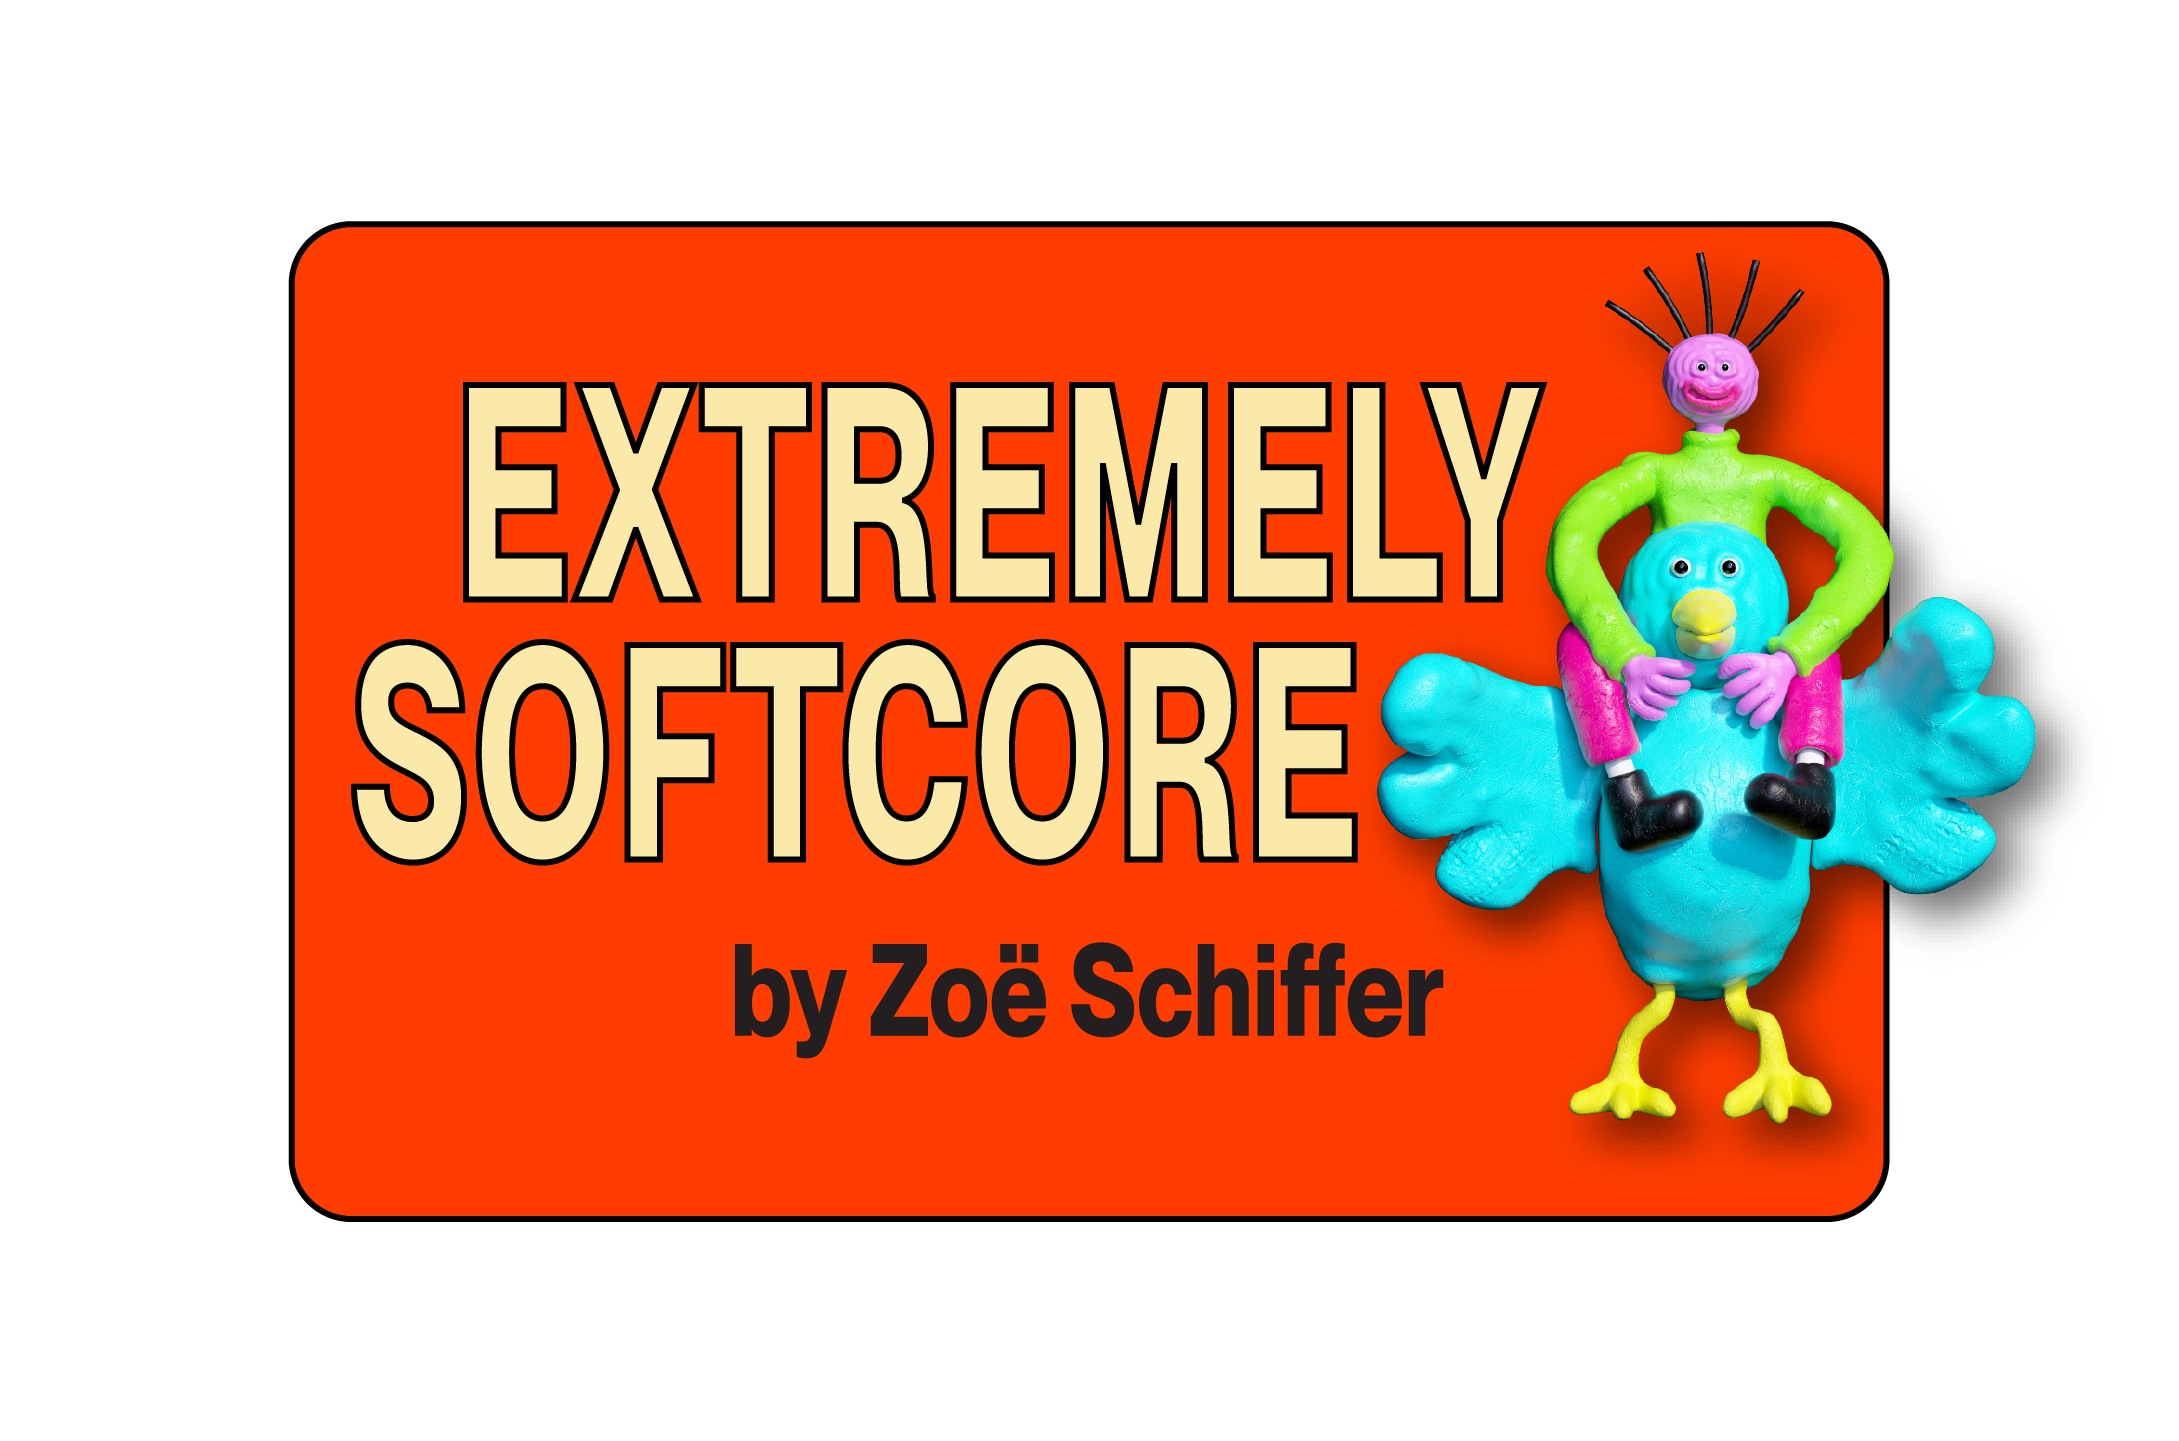 Extremely Softcore, by Zoe Schiffer